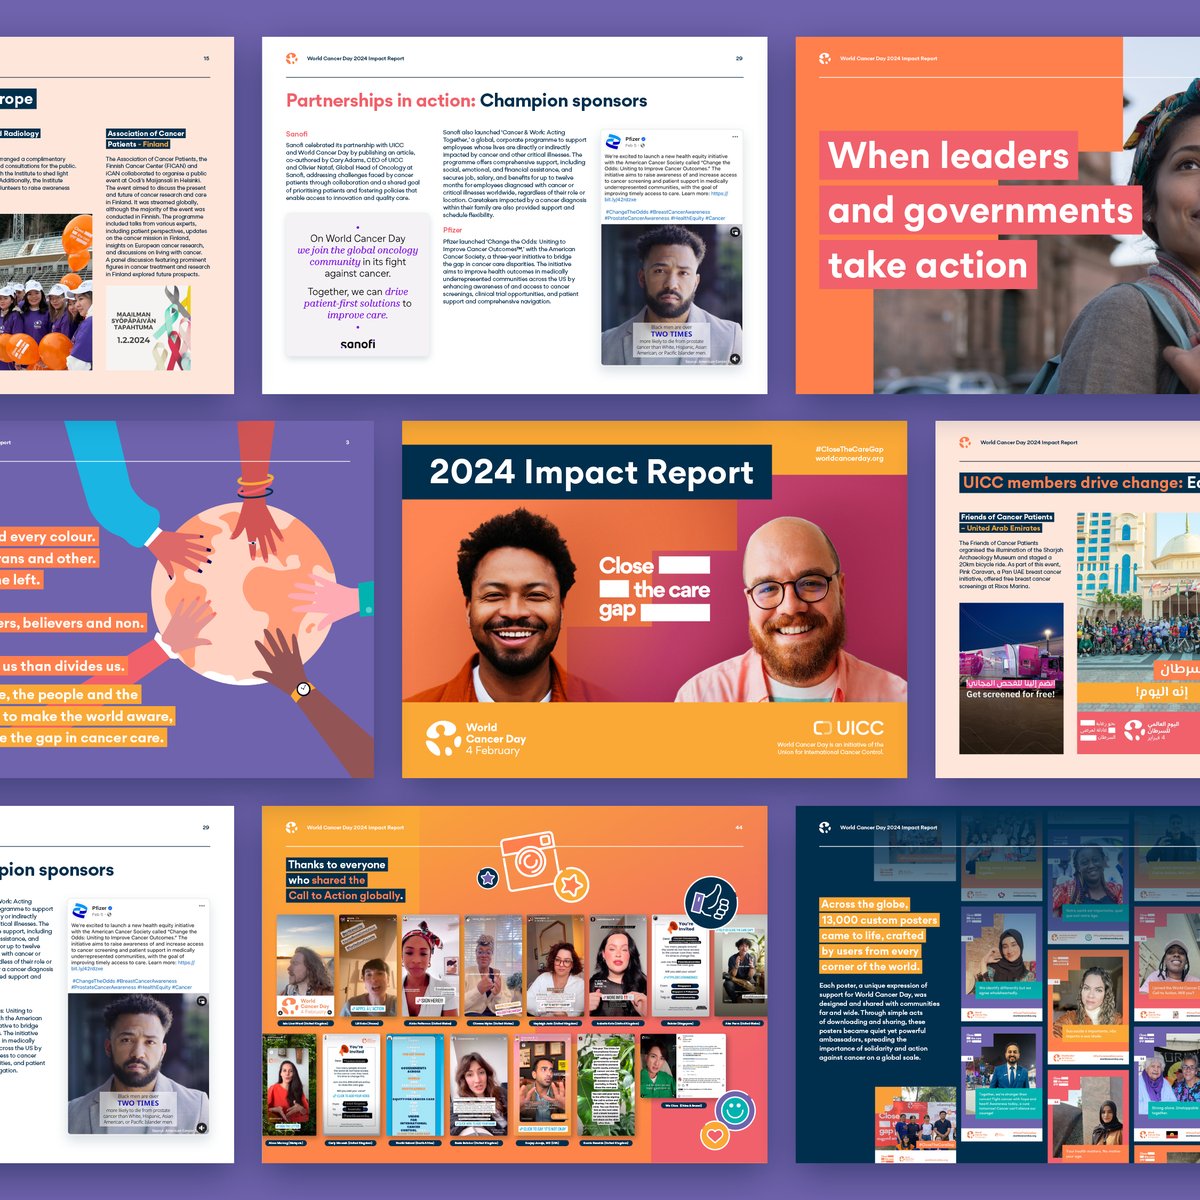 Together, we made a difference. On 4 Feb, the #WorldCancerDay ‘Close The Care Gap’ campaign showed its success in advocating greater equity and prompting action around the world. Thank you to our members, partners, and everyone involved. Impact report: uicc.org/resources/worl…